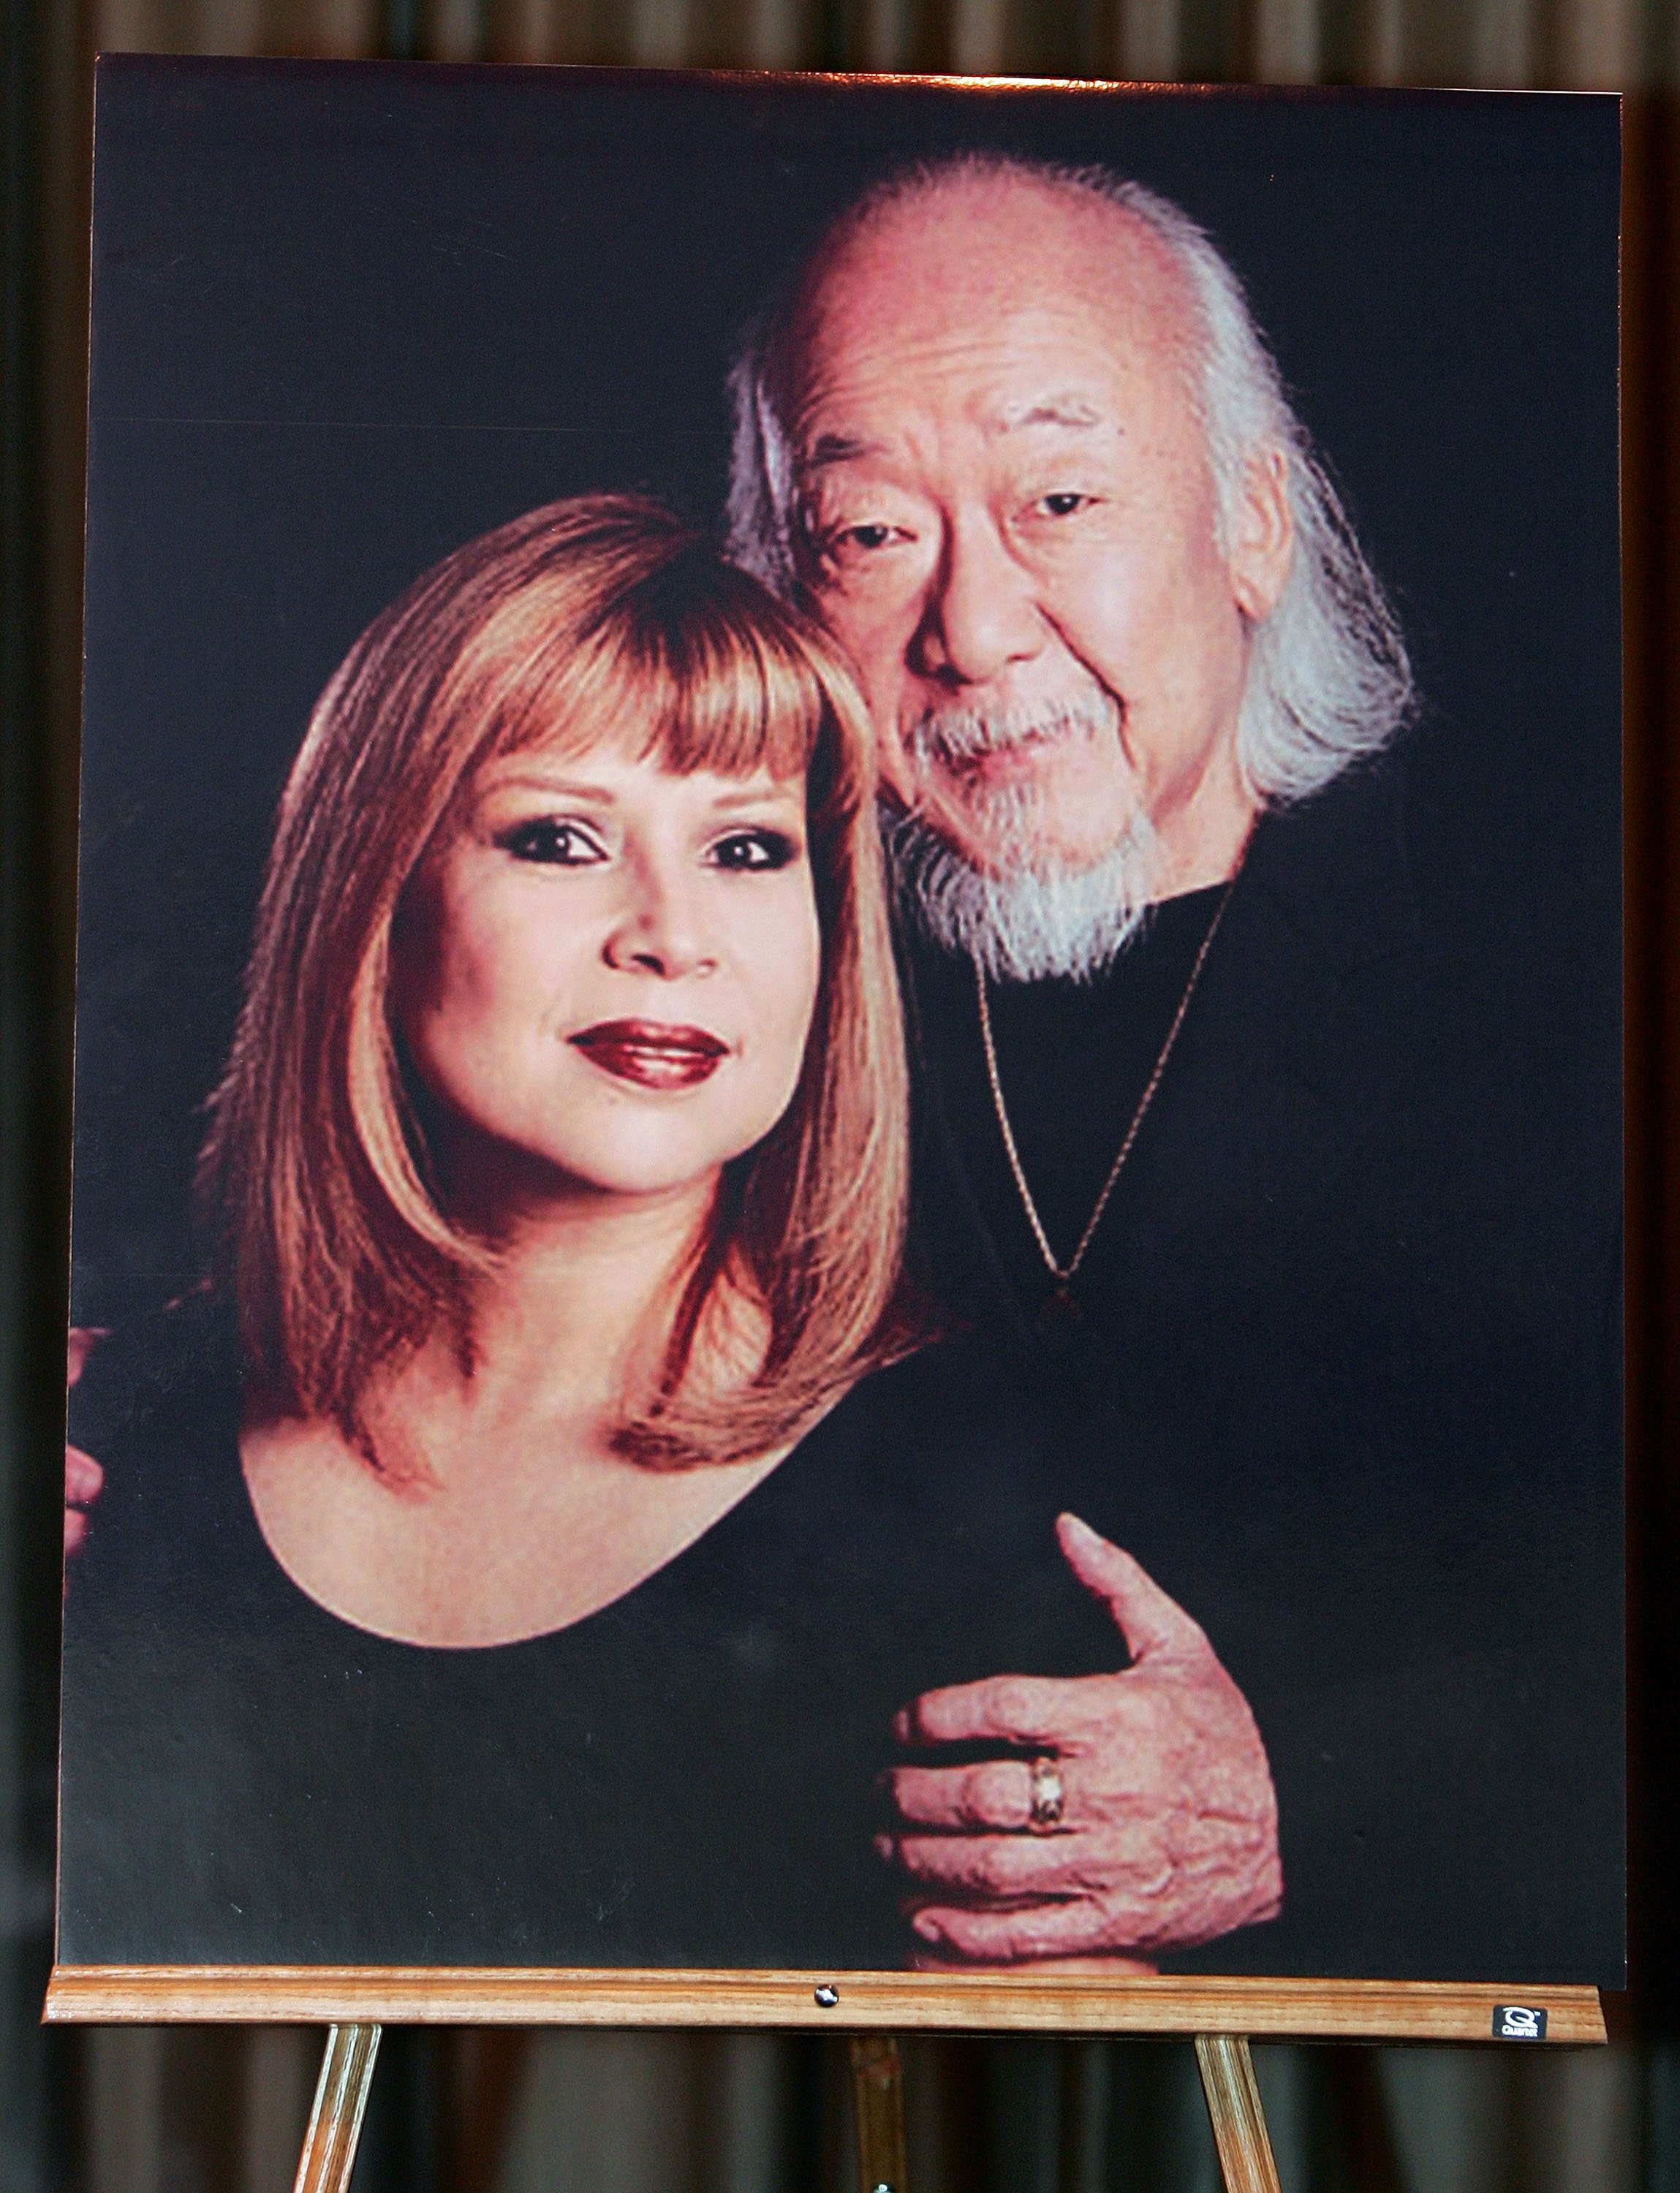 A photo of Pat Morita and his wife, Evelyn Guerrero, displayed during a memorial service for him at the Palm Mortuary & Memorial Park November 30, 2005 in Las Vegas, Nevada. / Source: Getty Images